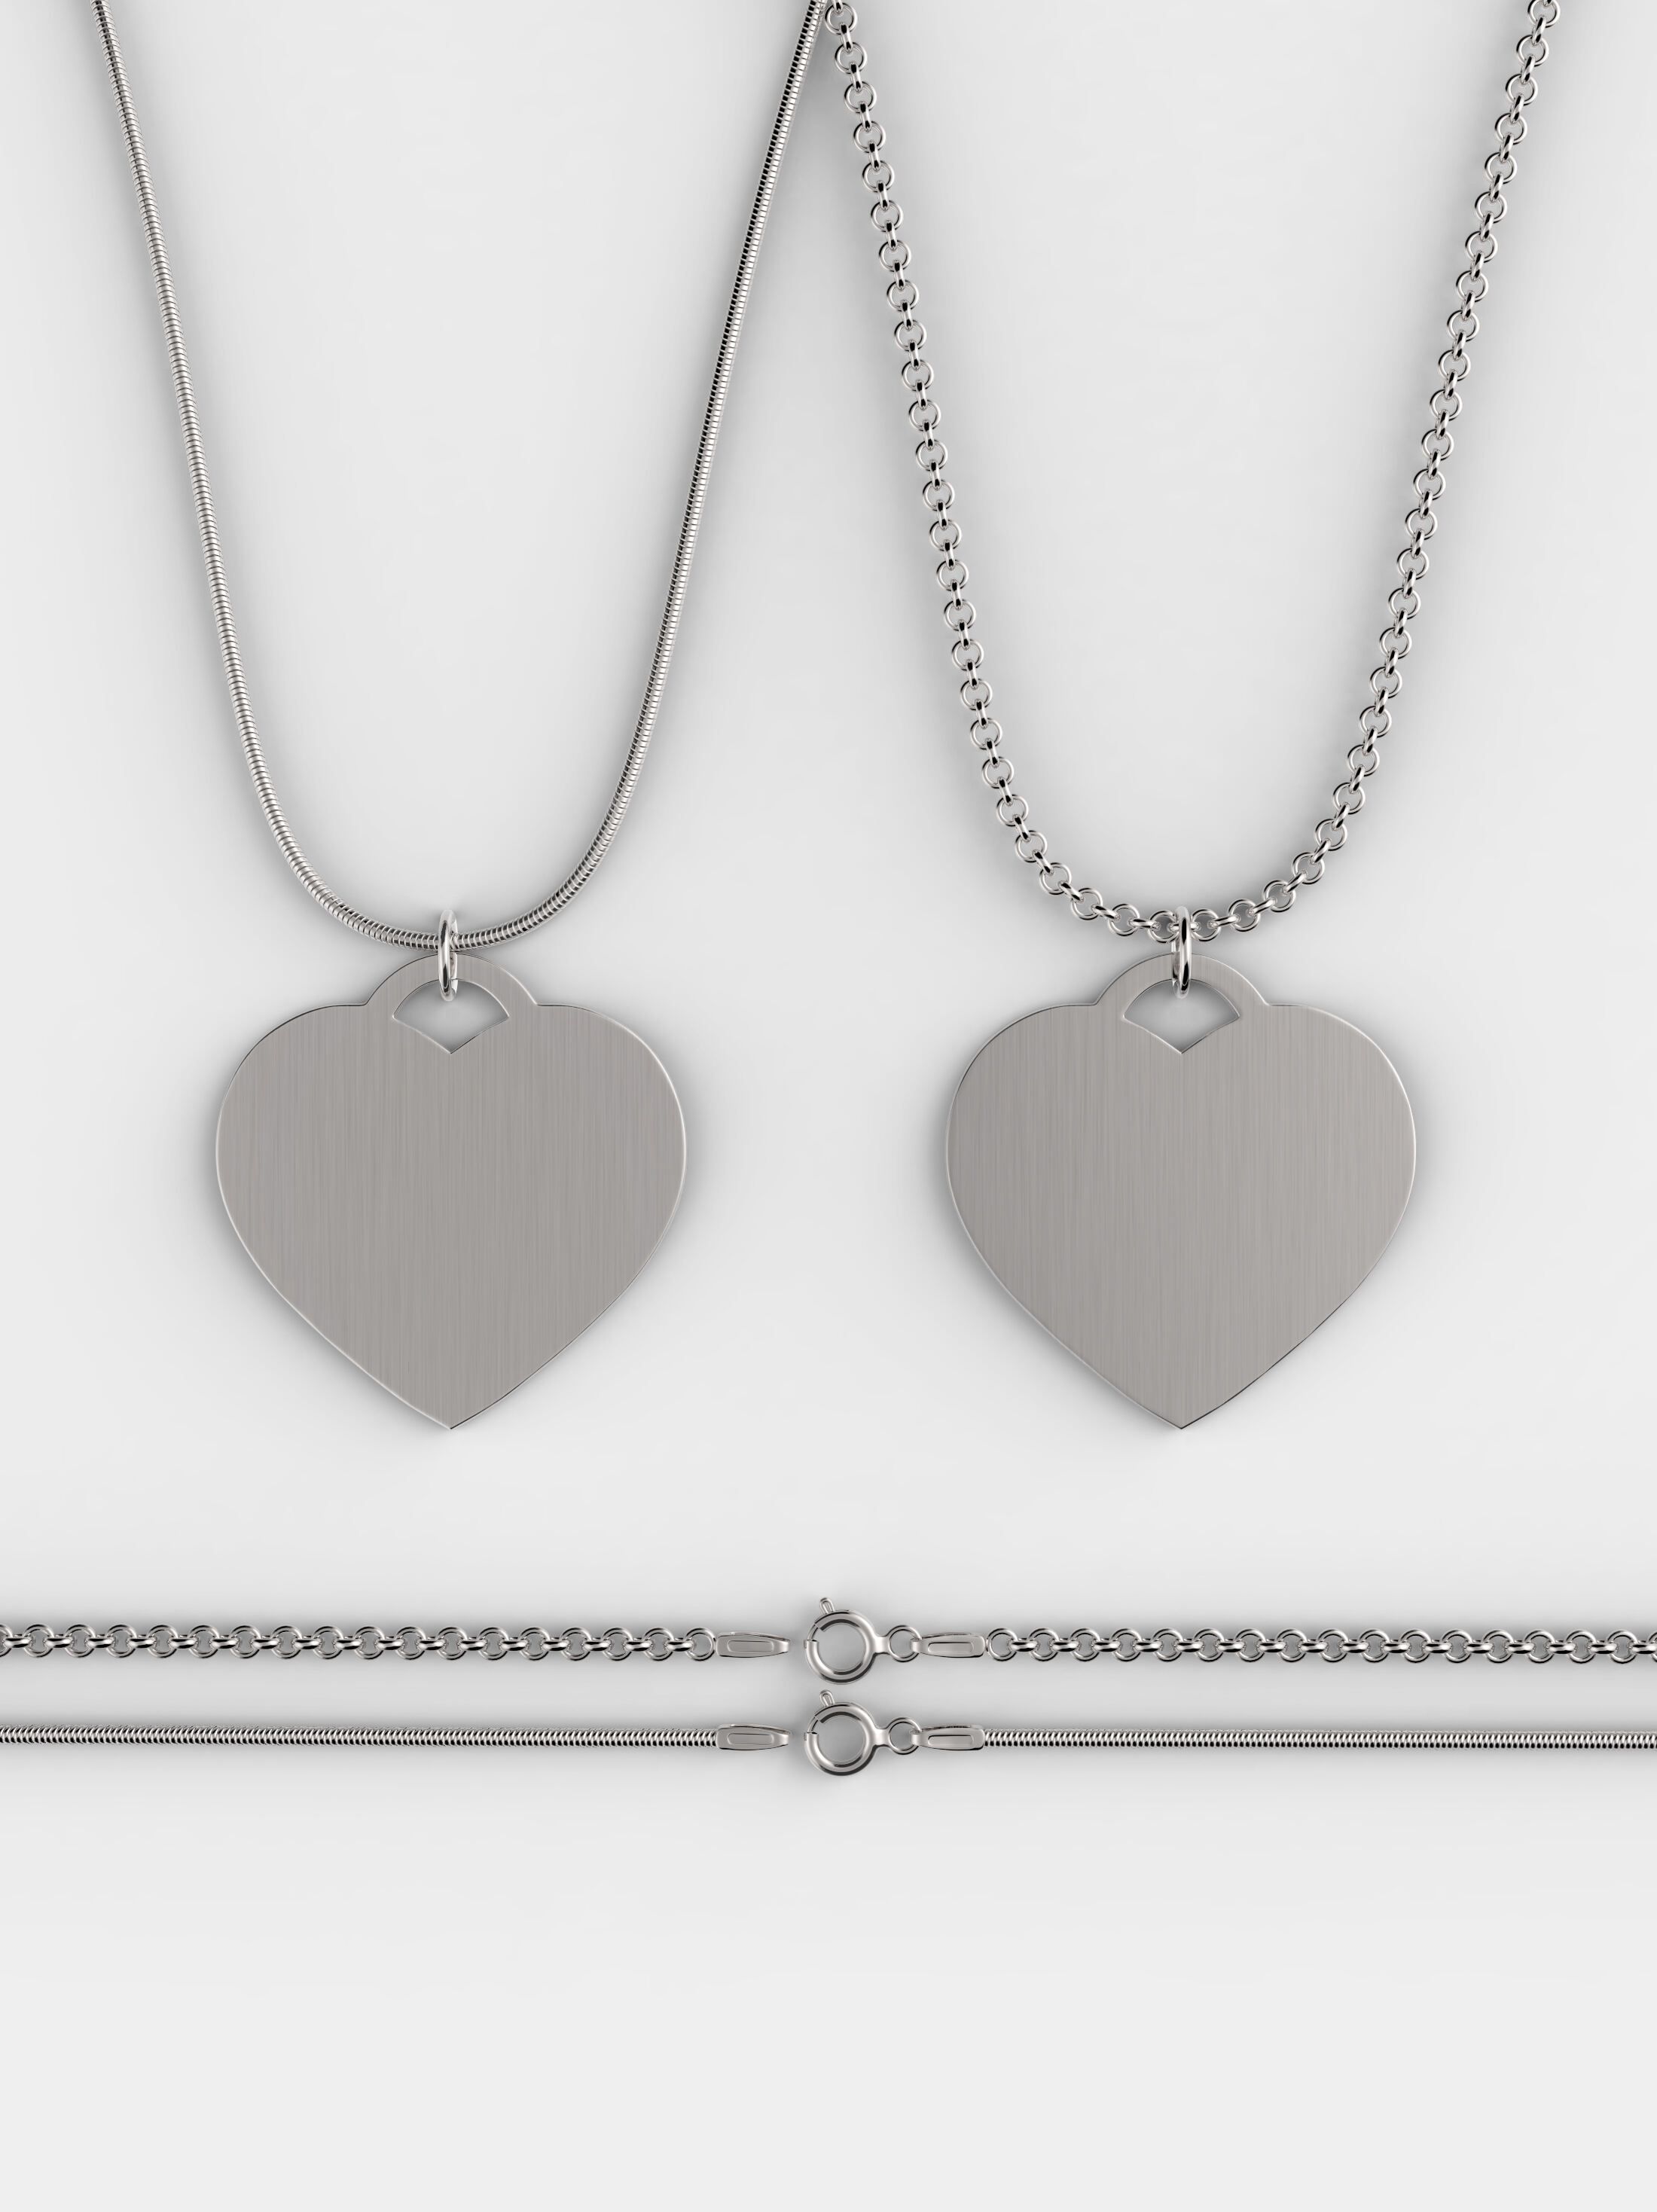 design your own heart necklace options